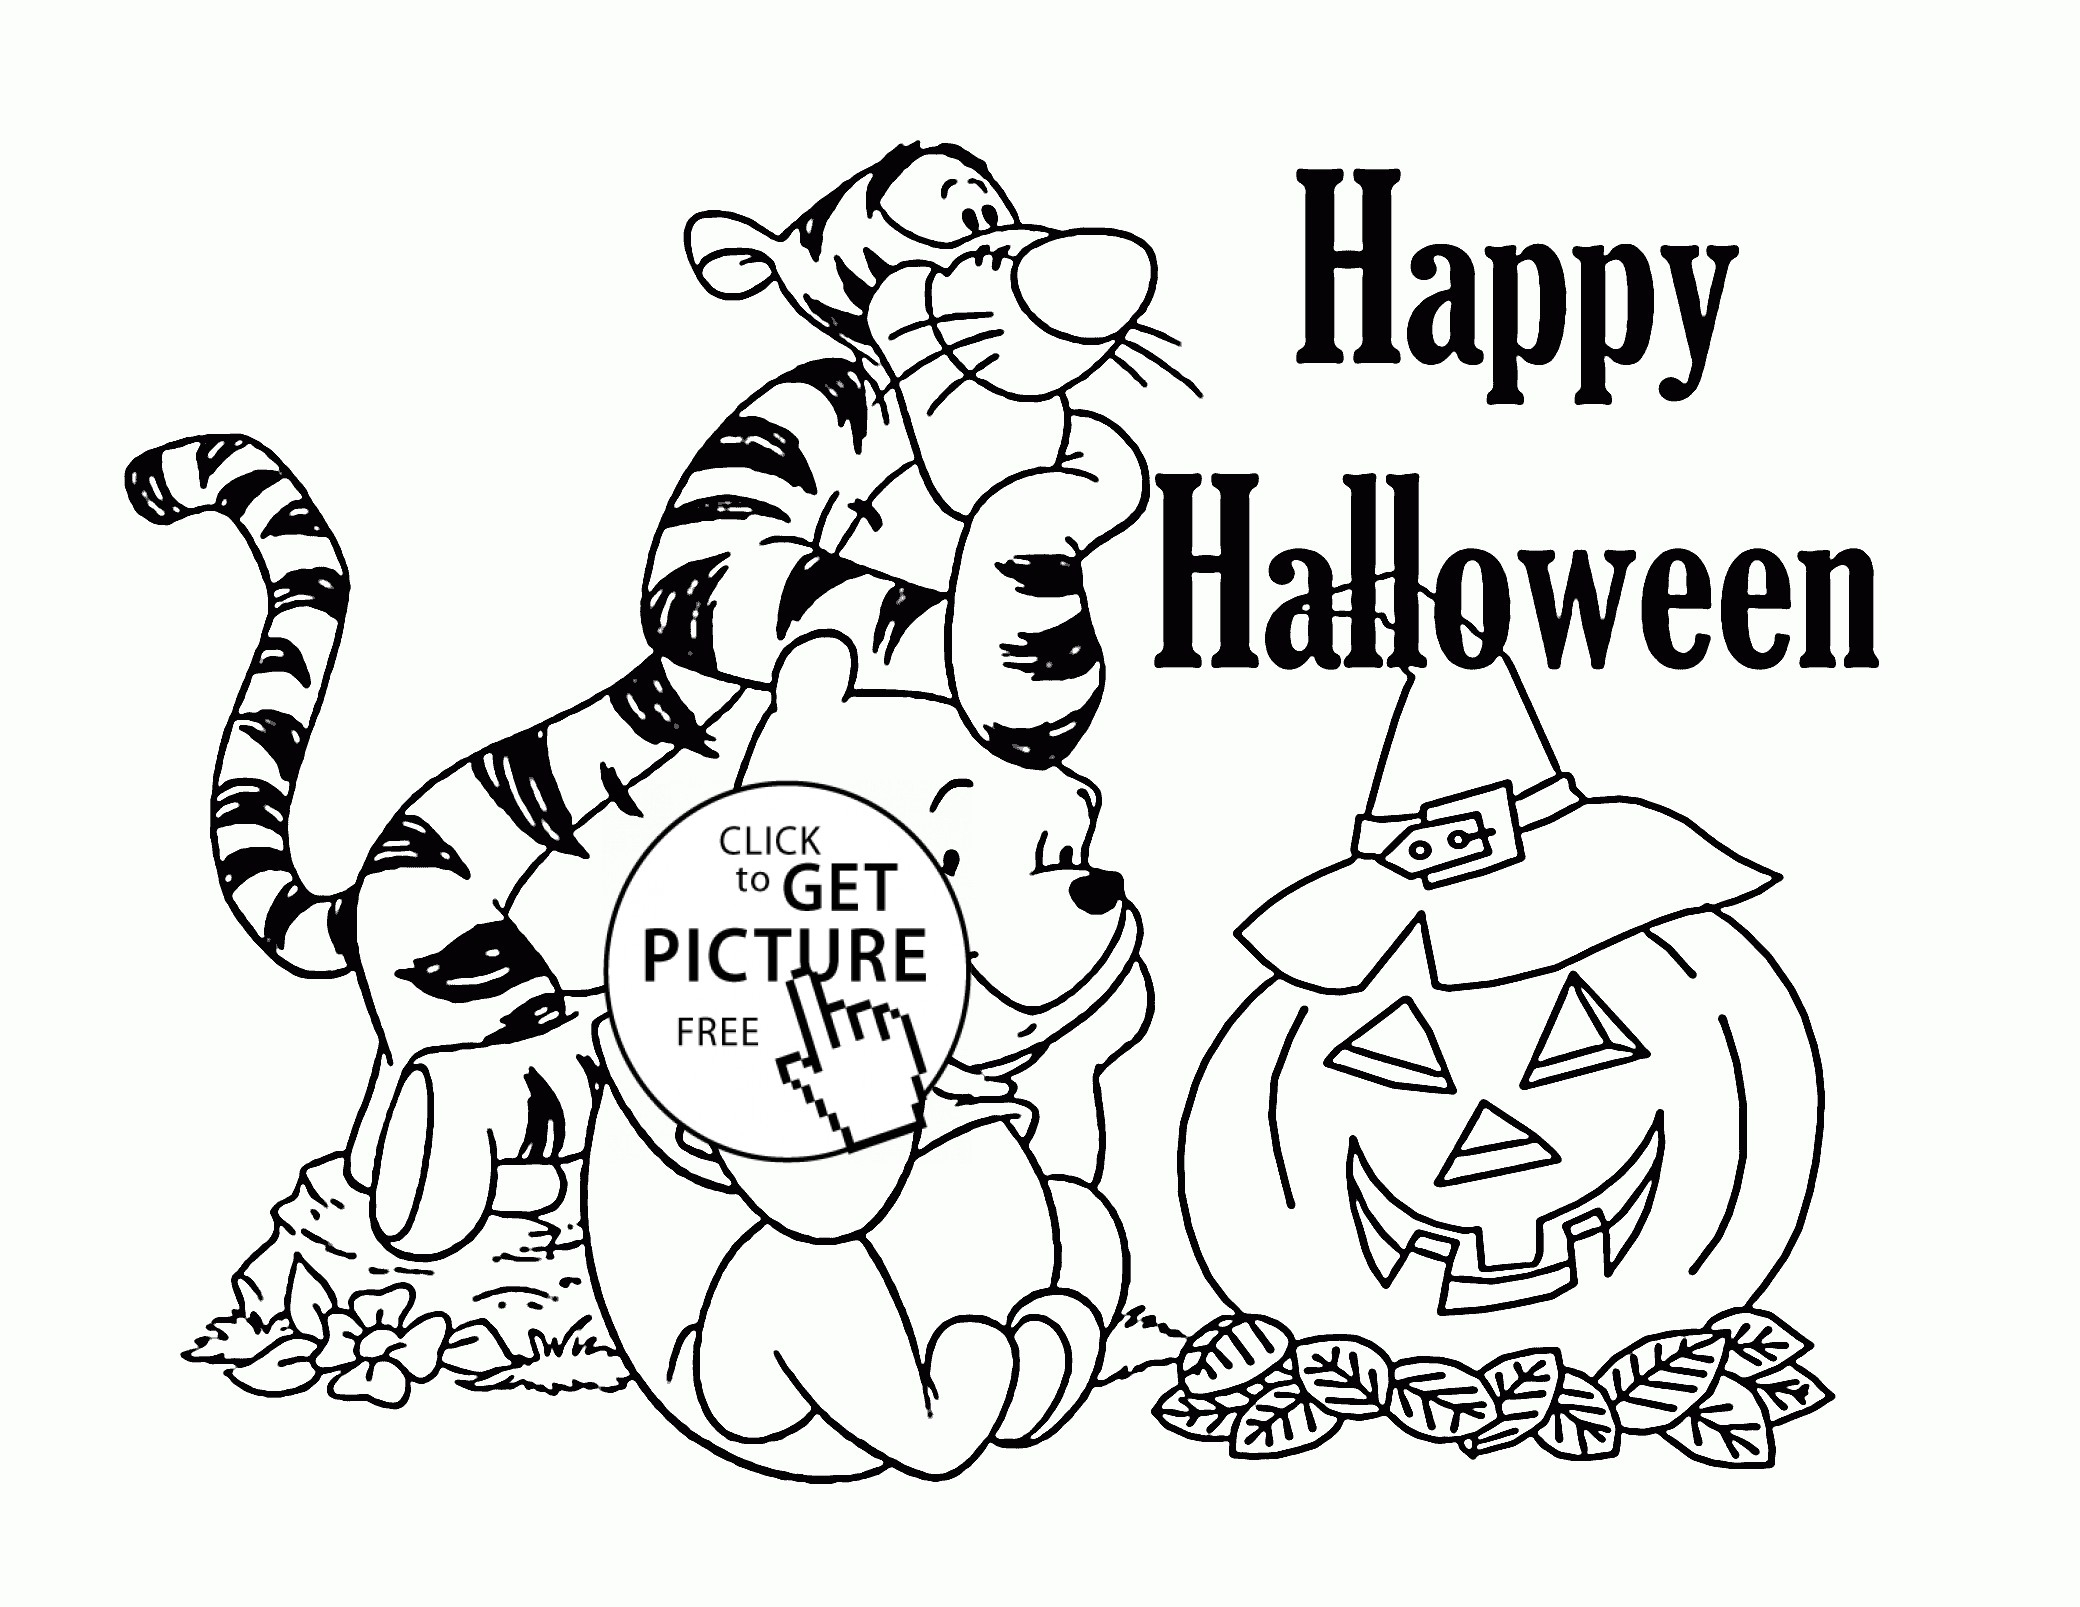 Halloween Coloring Pages For Kids at Free printable